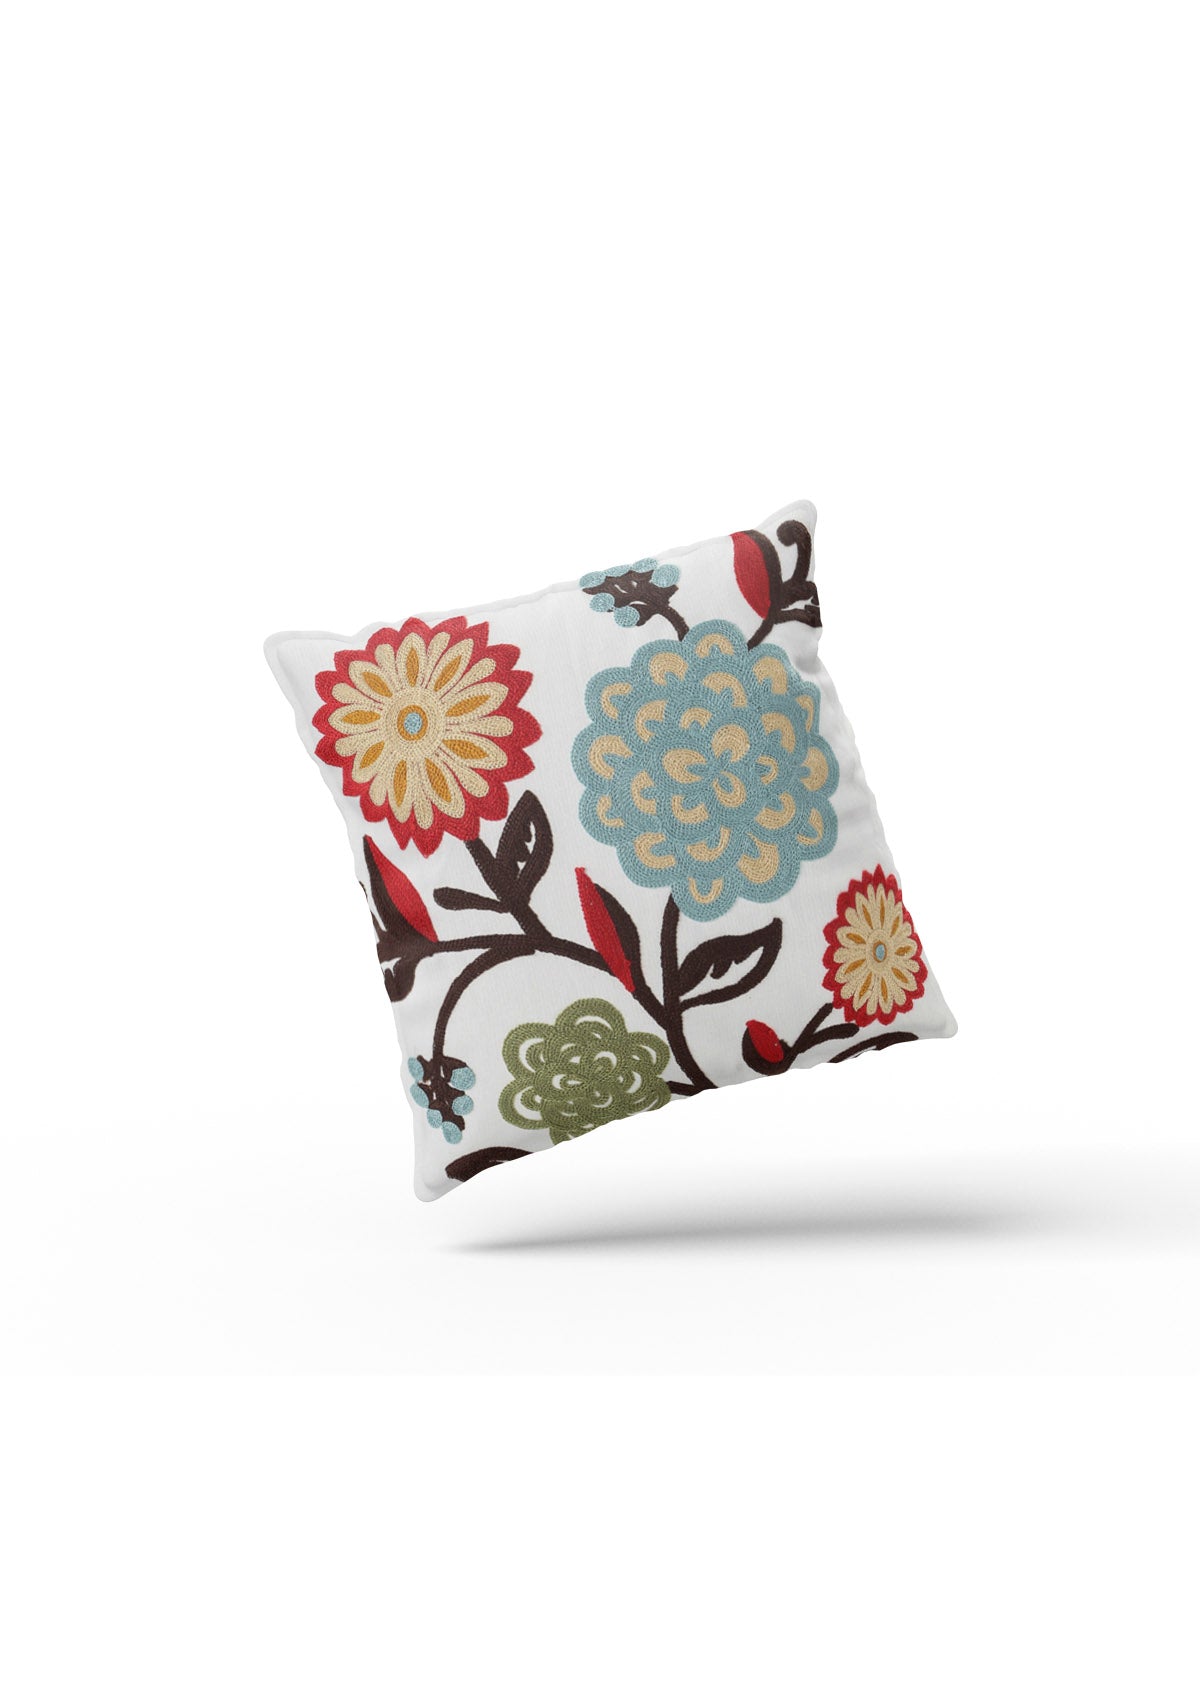 Cushion cover adorned with a beautiful assortment of hand-painted flowers, adding a touch of nature-inspired elegance